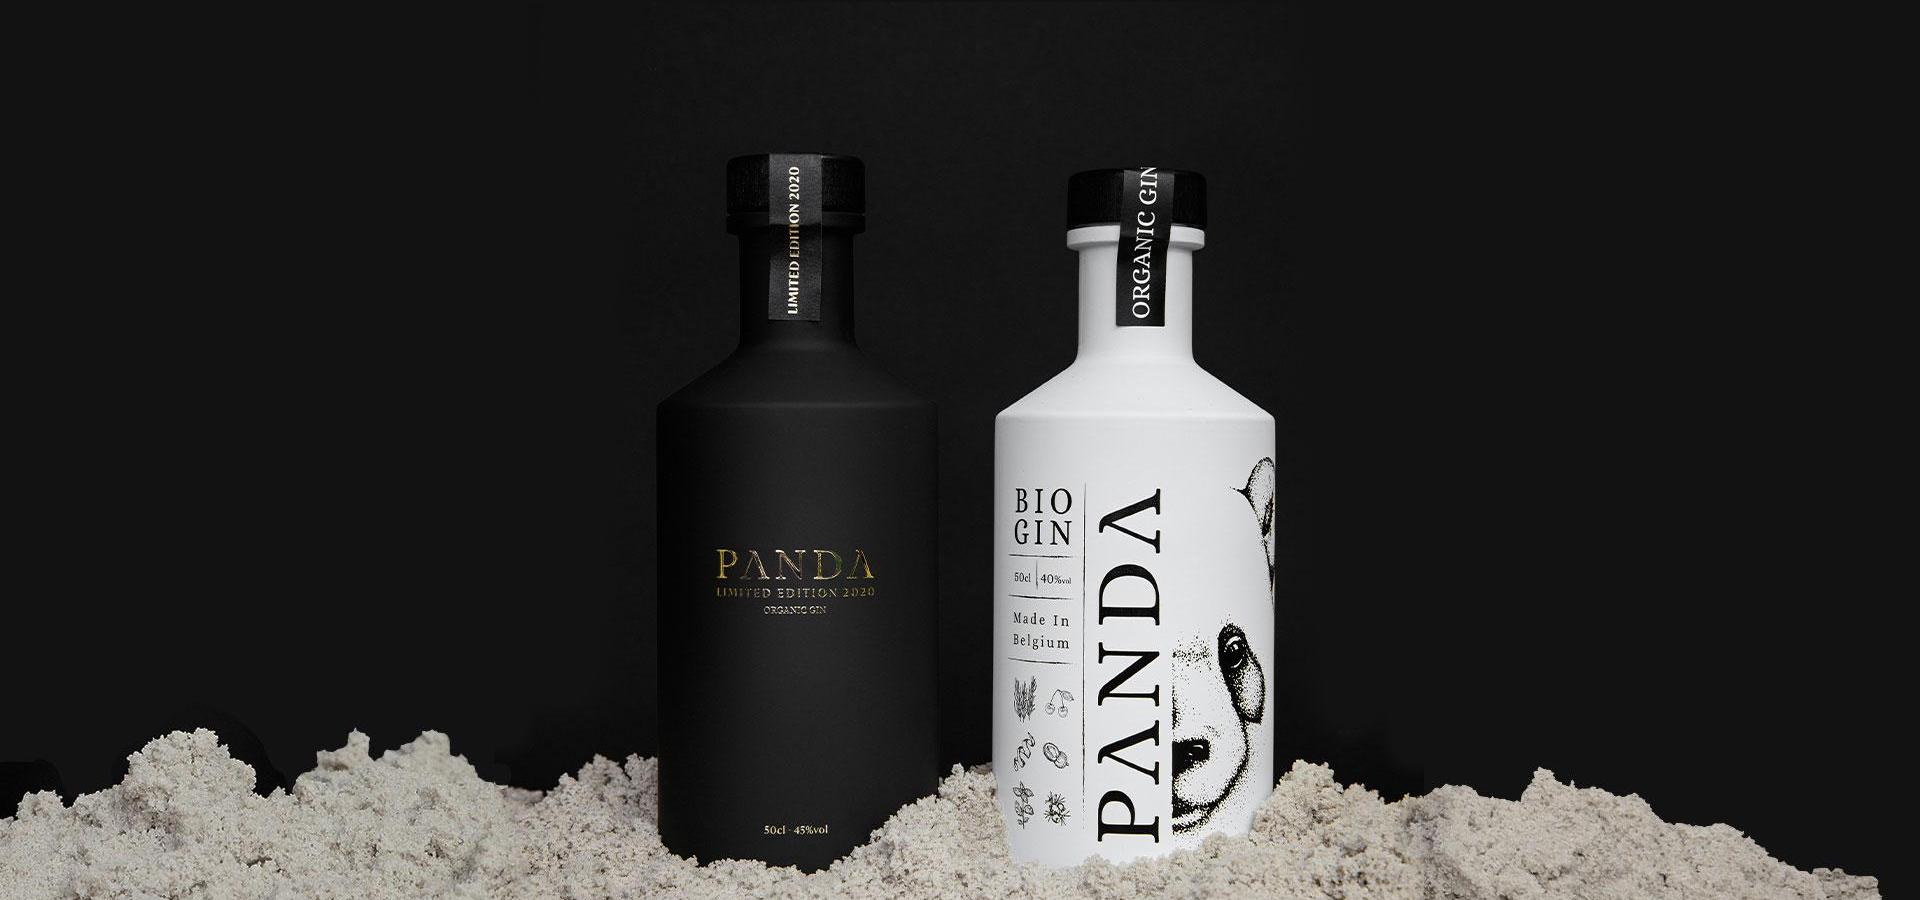 Limited edition 2020 by Panda Gin